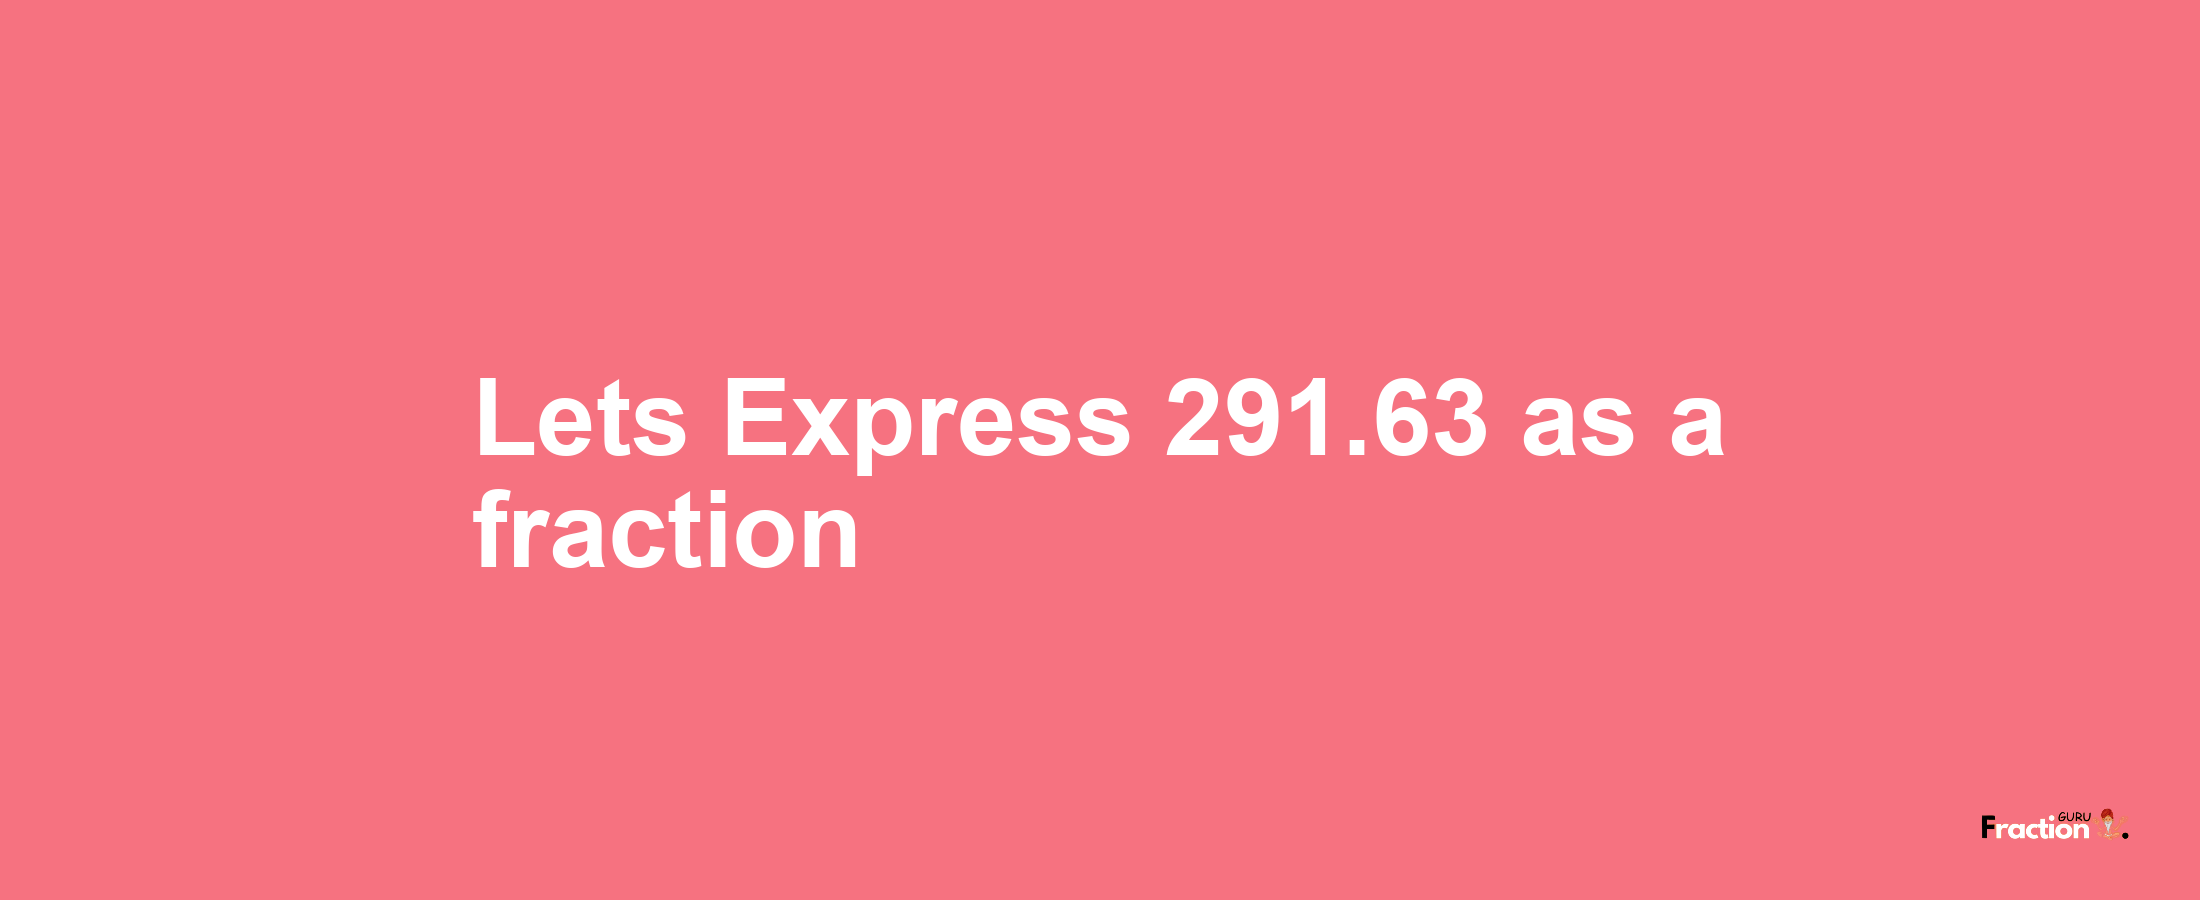 Lets Express 291.63 as afraction